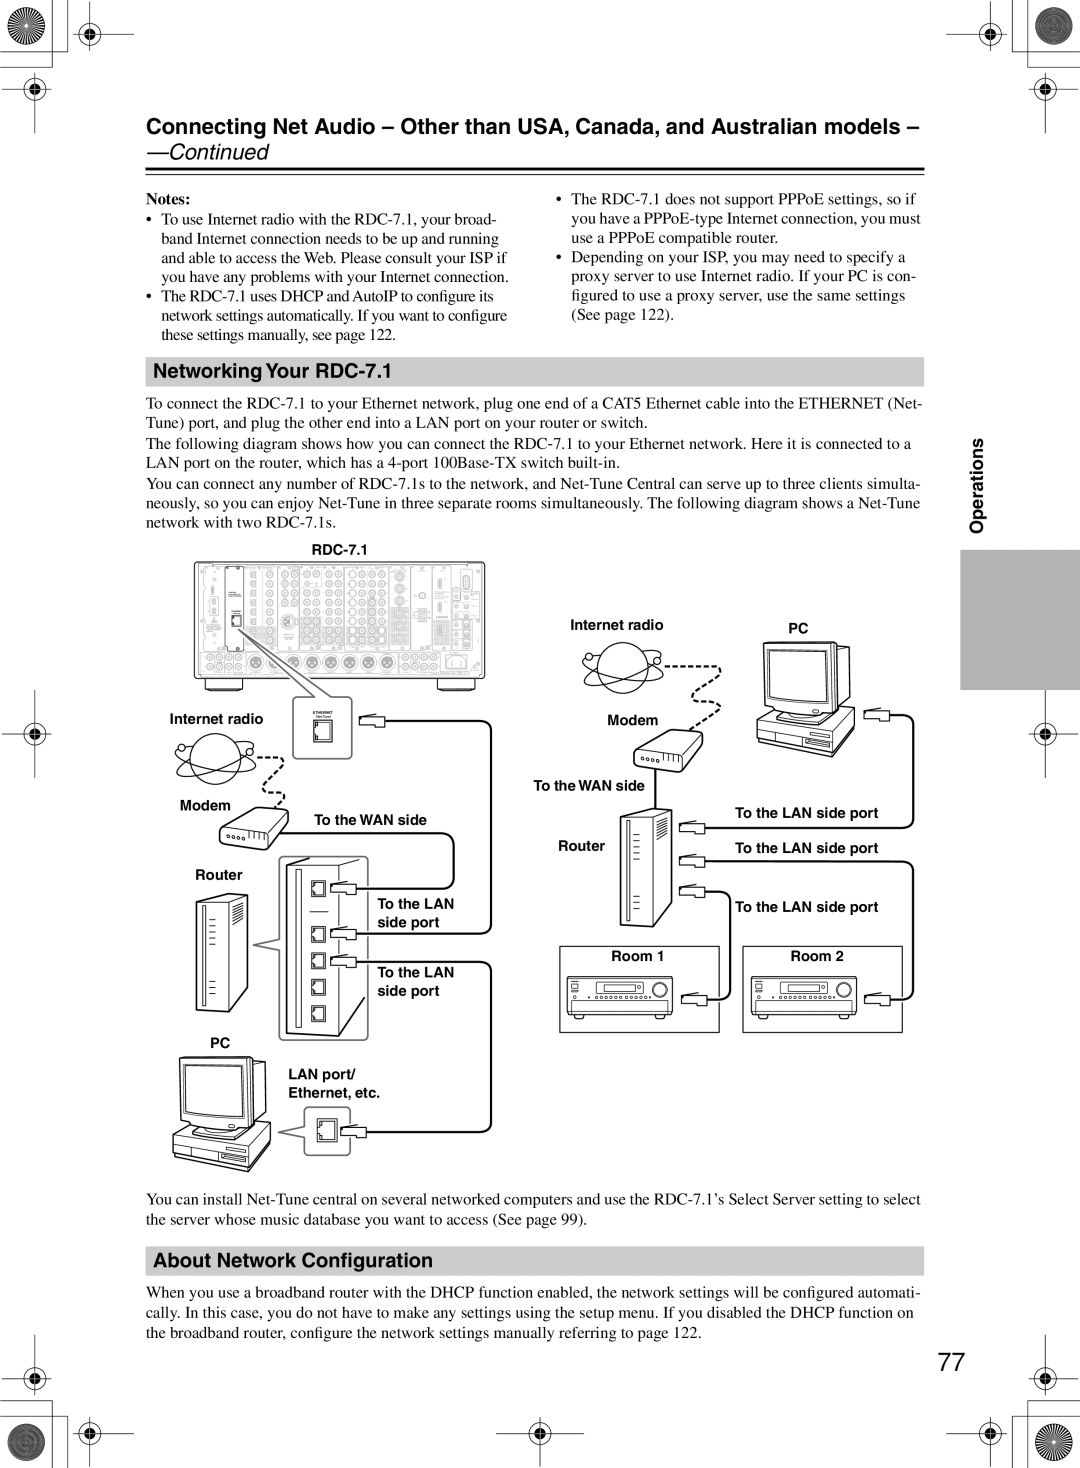 Integra instruction manual Continued, About Network Conﬁguration, Networking Your RDC-7.1, Operations, Notes 